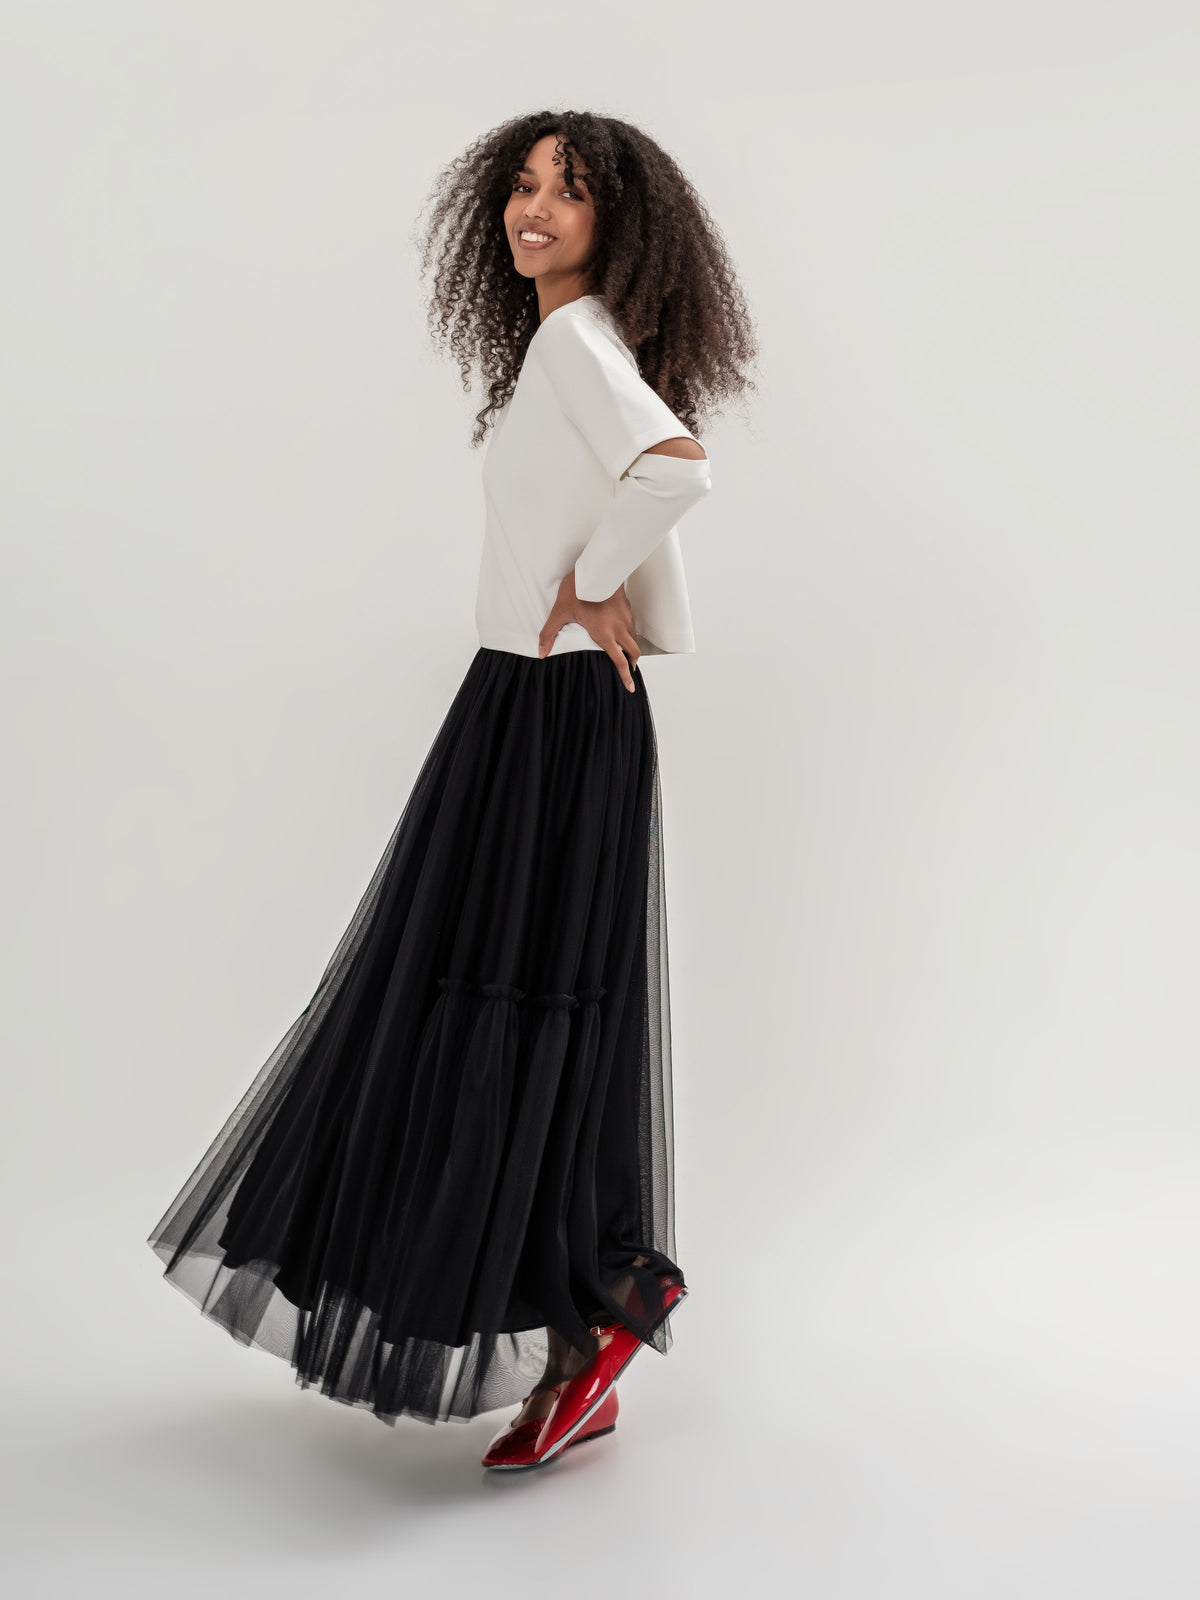 White top with slits in the elbow area and tulle black skirt